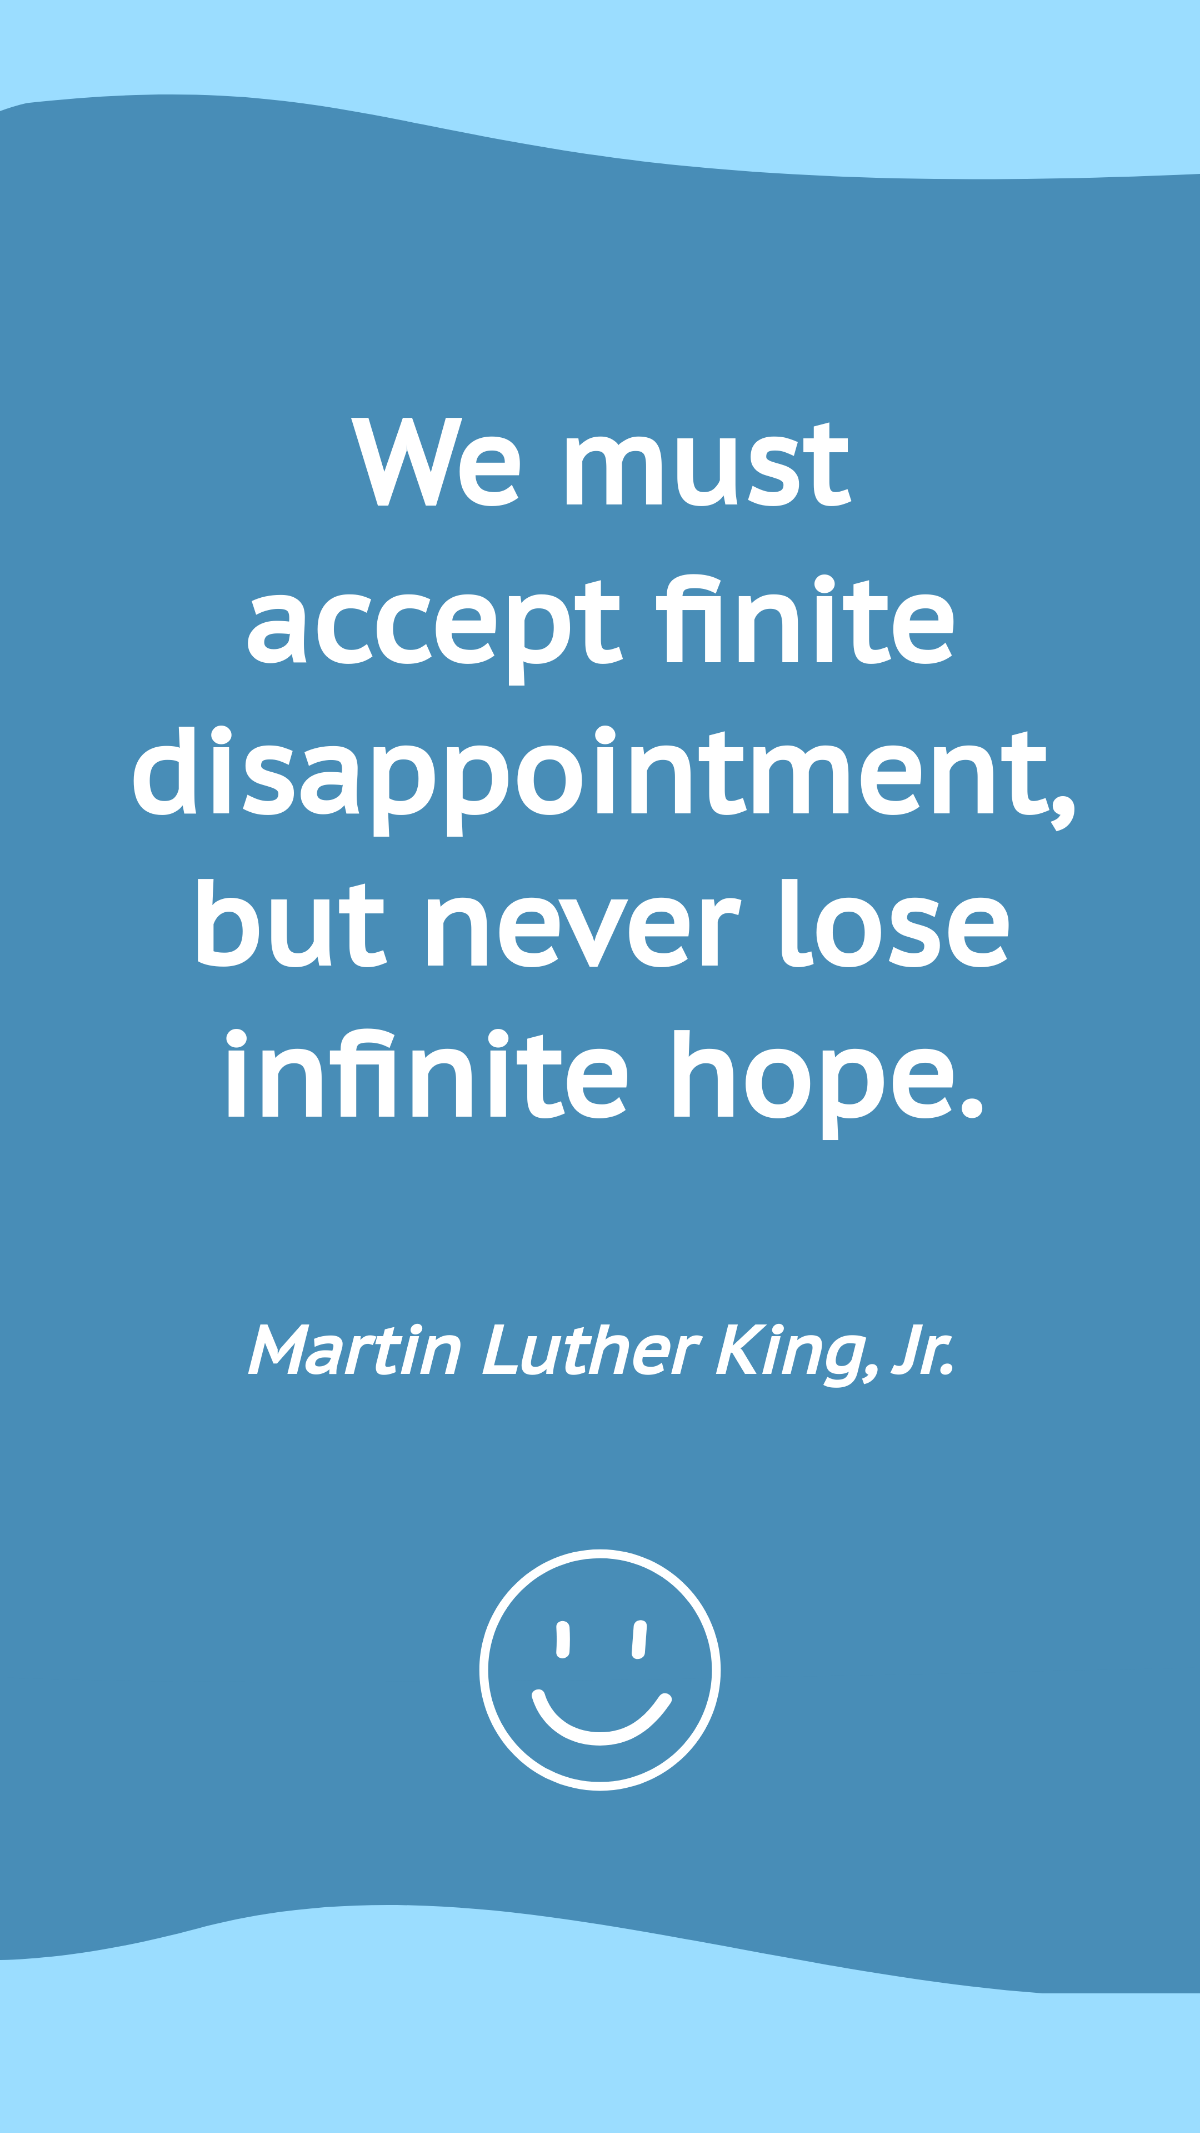 Free Martin Luther King, Jr. - We must accept finite disappointment, but never lose infinite hope. Template